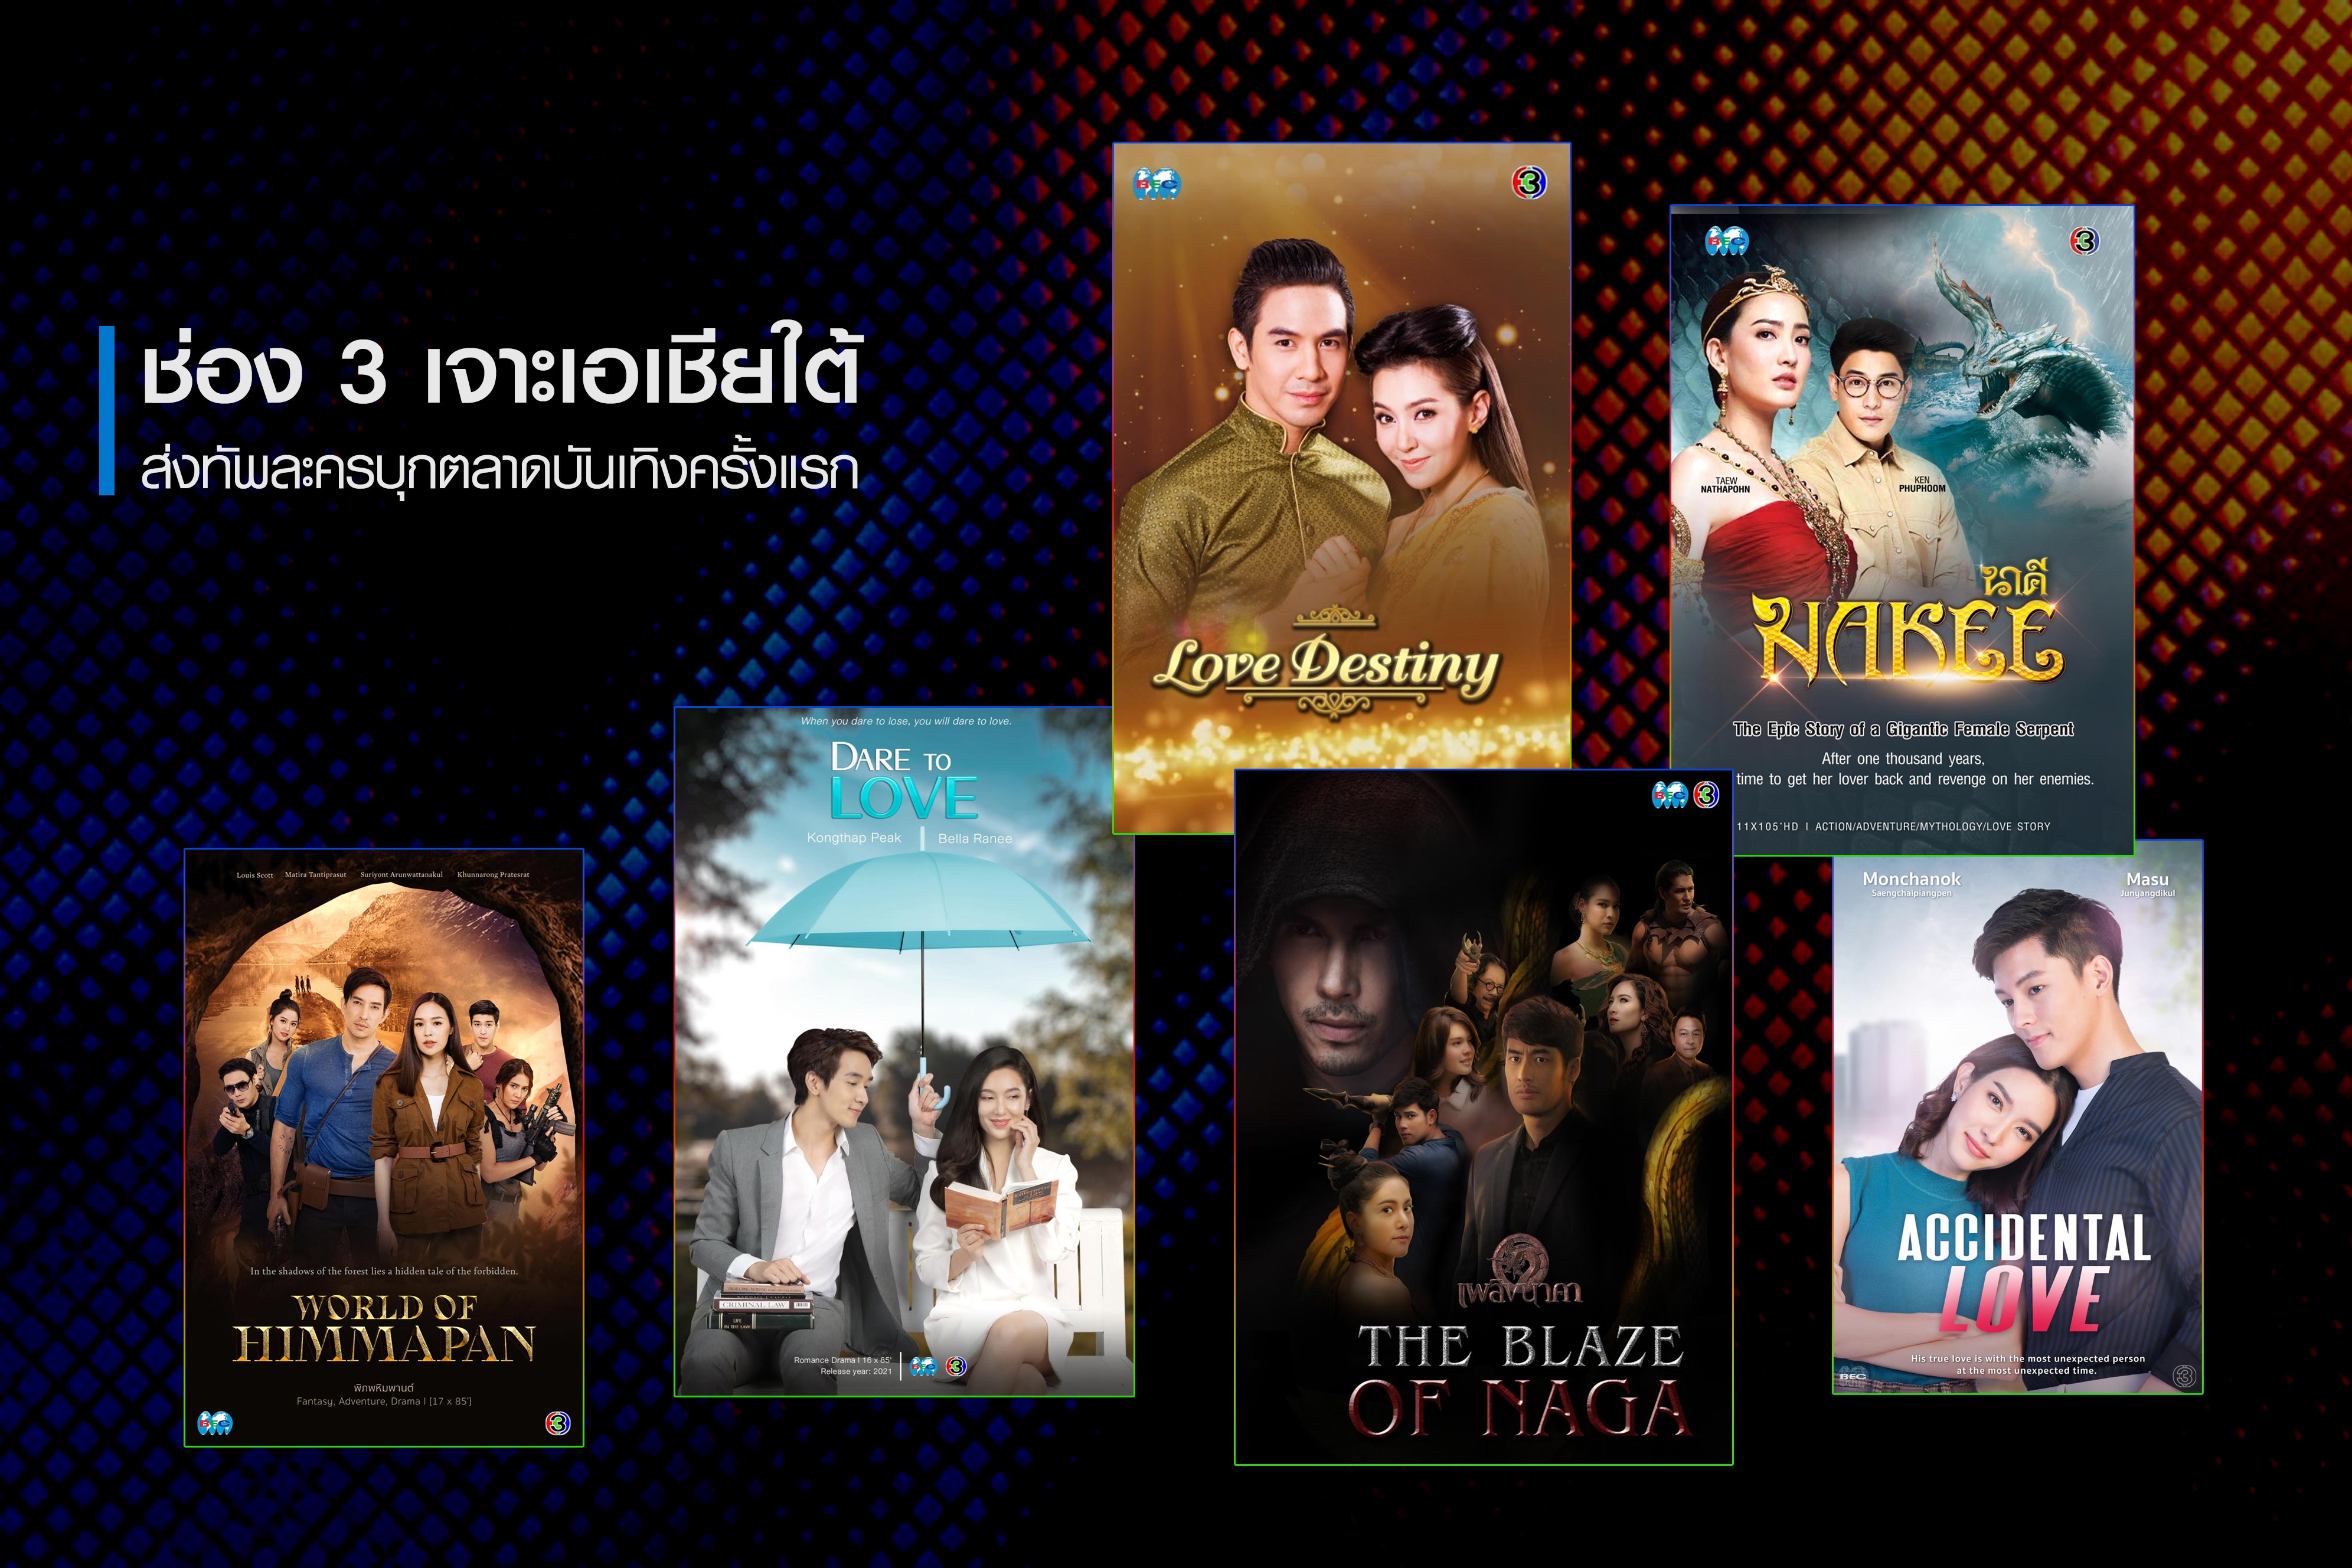 BEC World penetrated India for the first time, sold 200+ hours of Channel 3 Thai drama series.